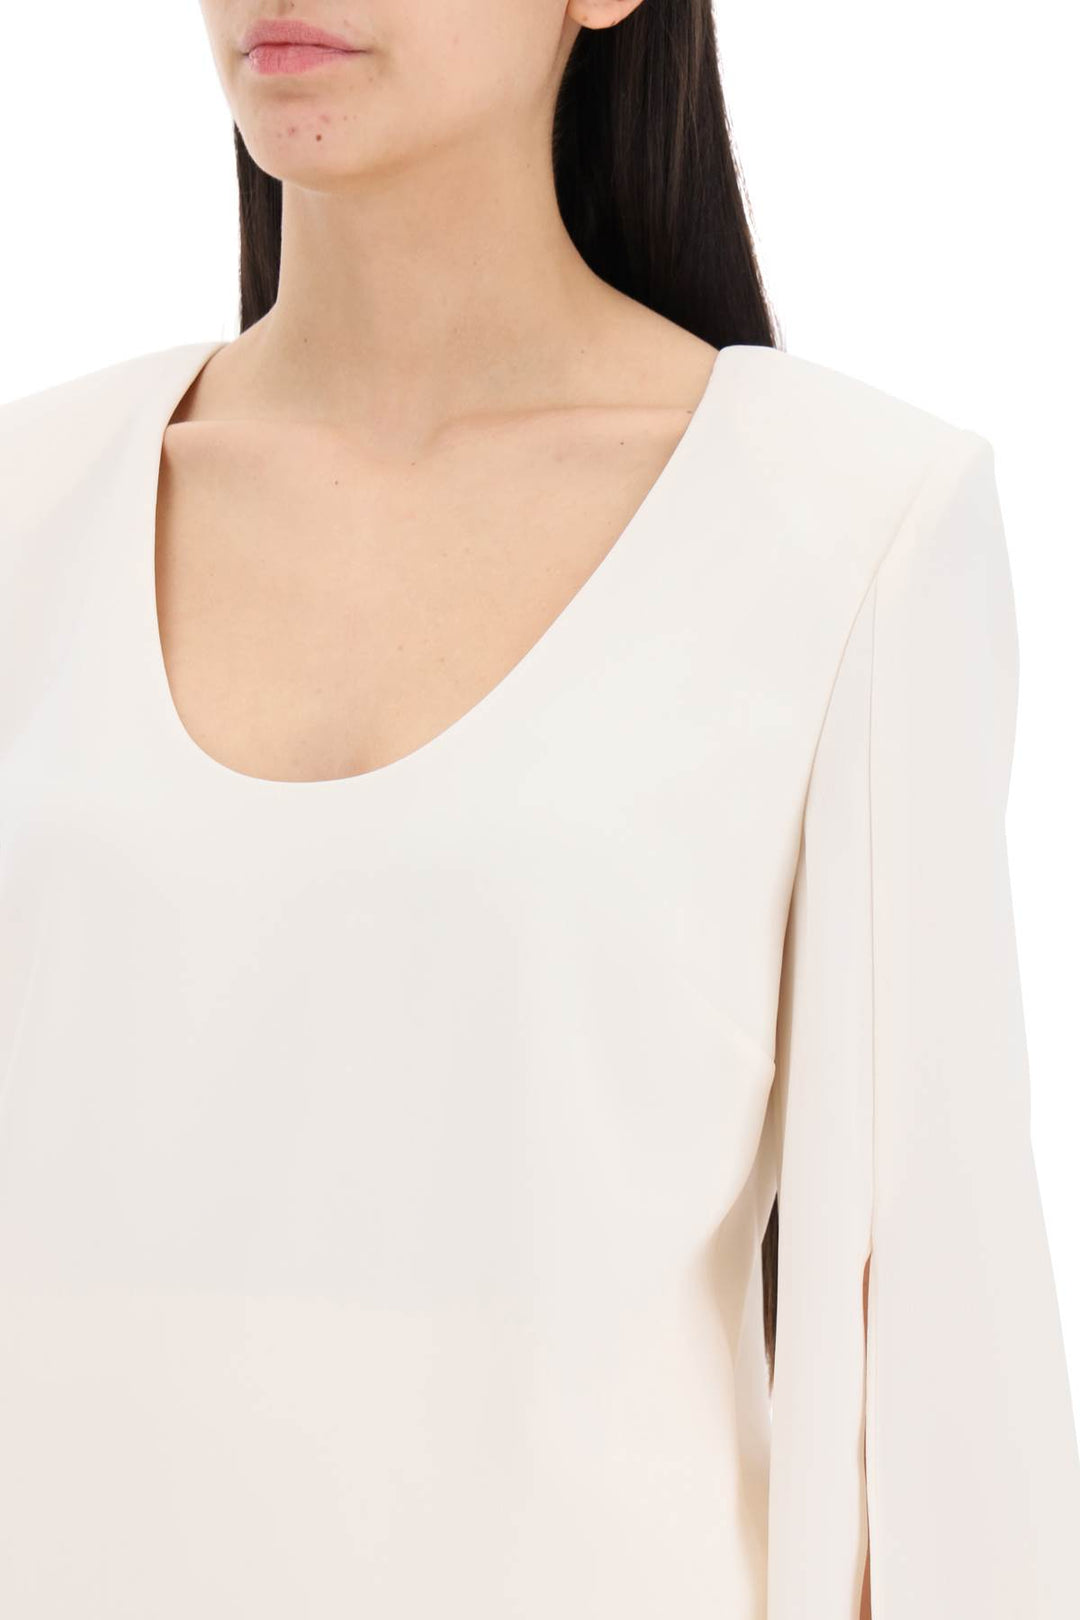 Roland Mouret Replace With Double Quotecady Top With Flared Sleevereplace With Double Quote   White